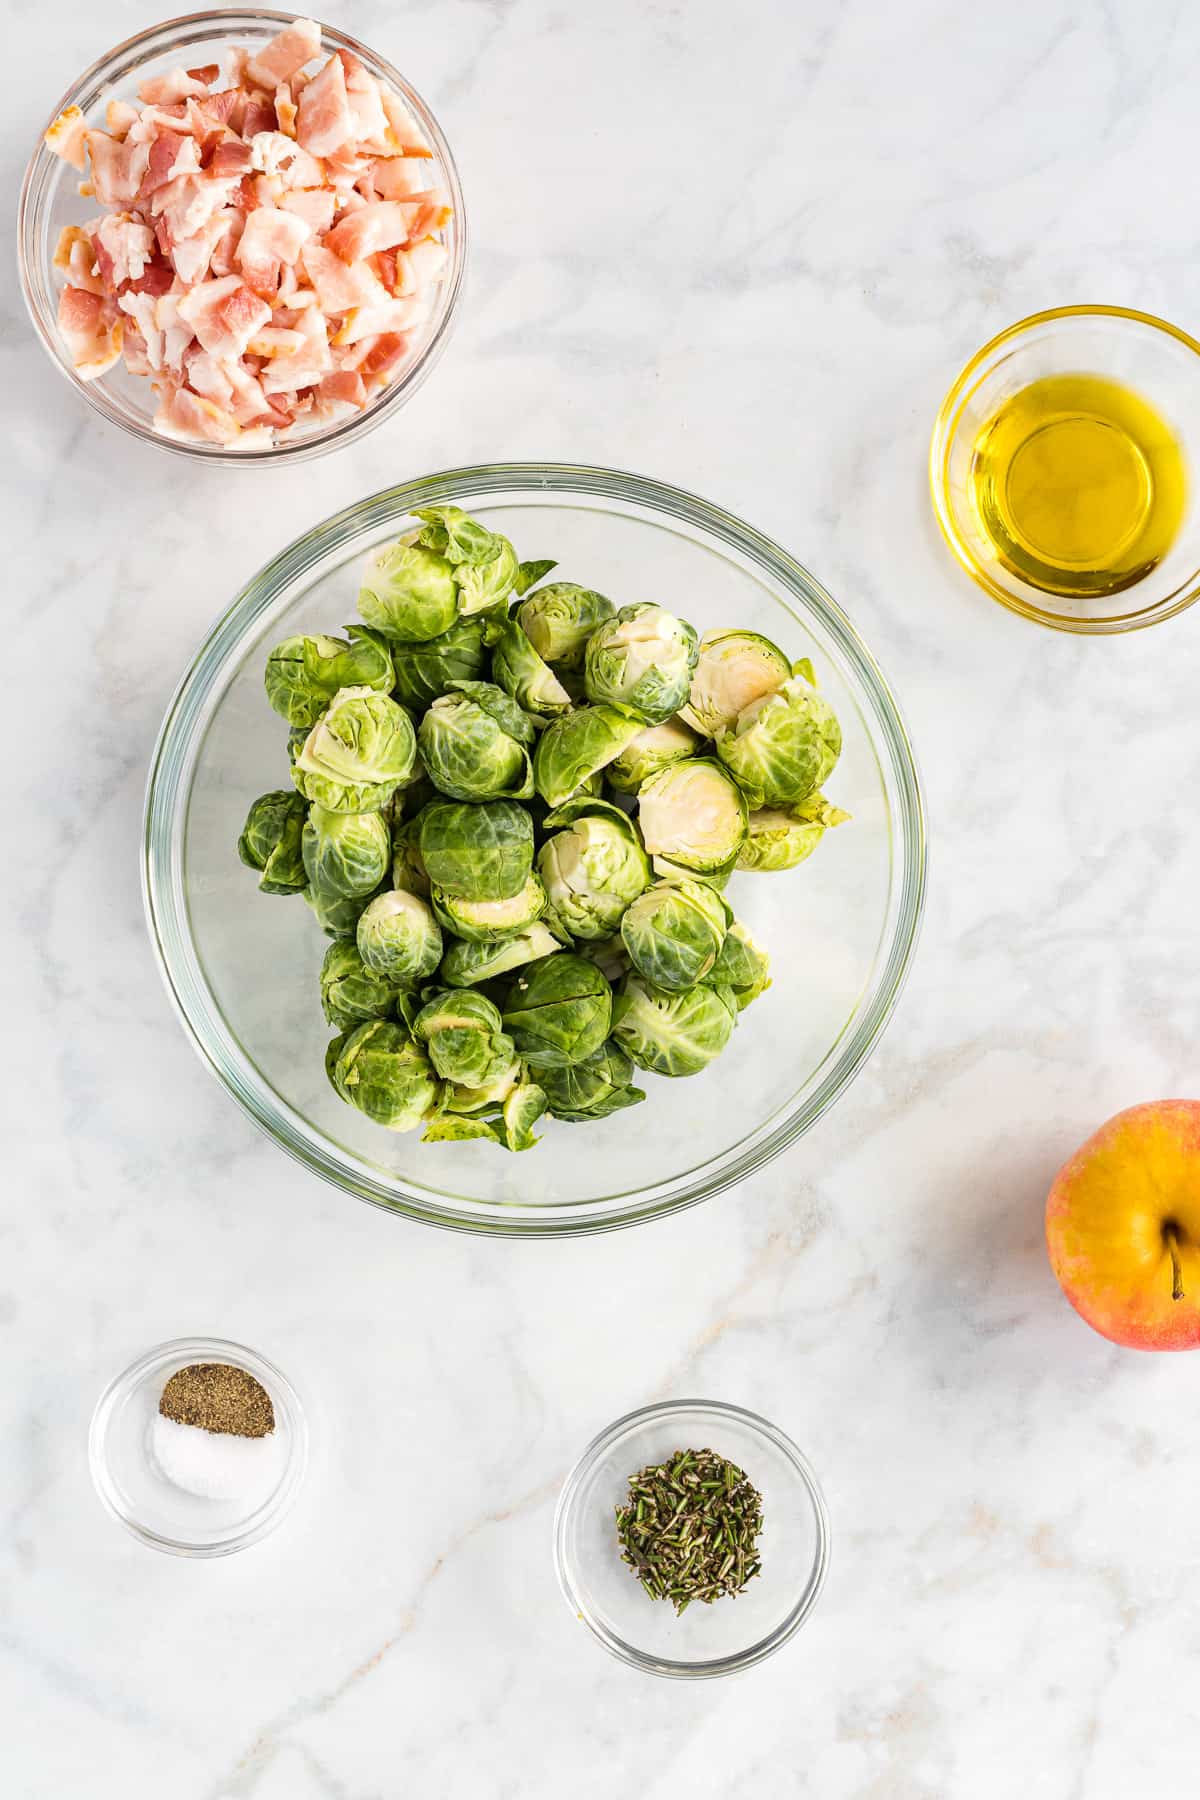 Bowls of brussels sprouts, chopped bacon, olive oil, seasonings, and an apple on a white surface.